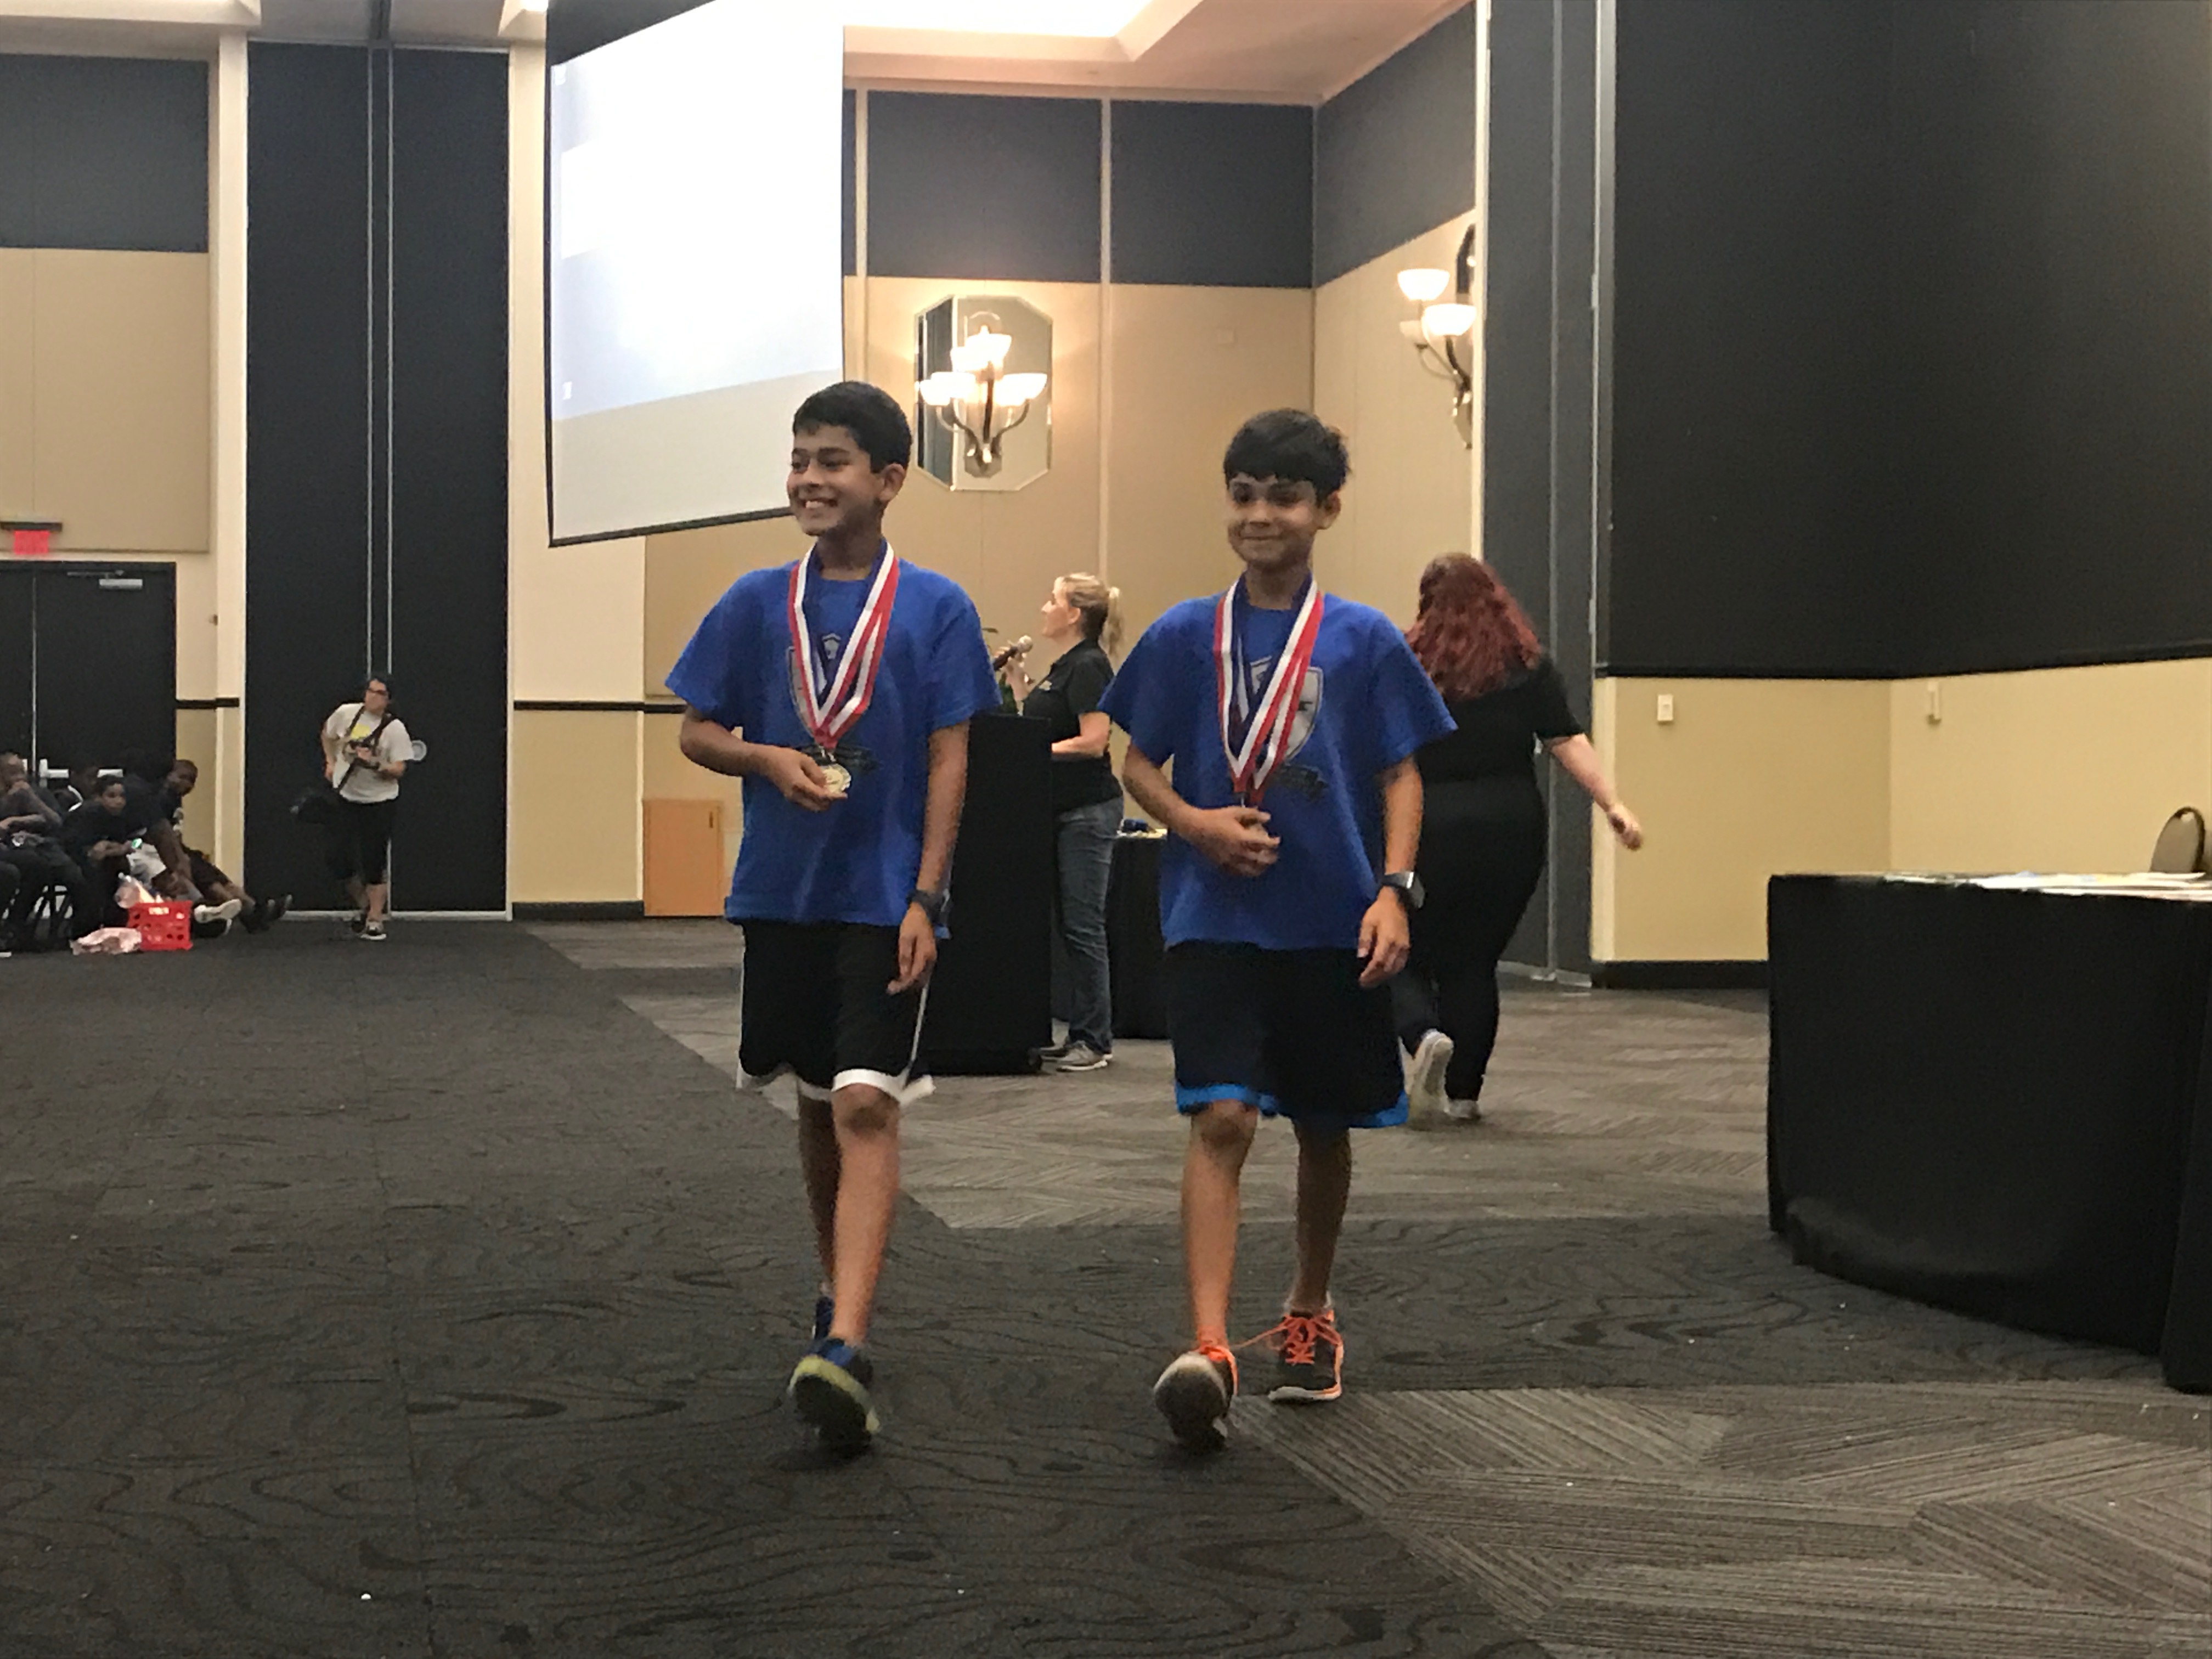 Two boys in matching blue shirts and blue pants holding medals around their necks walking towards the camera